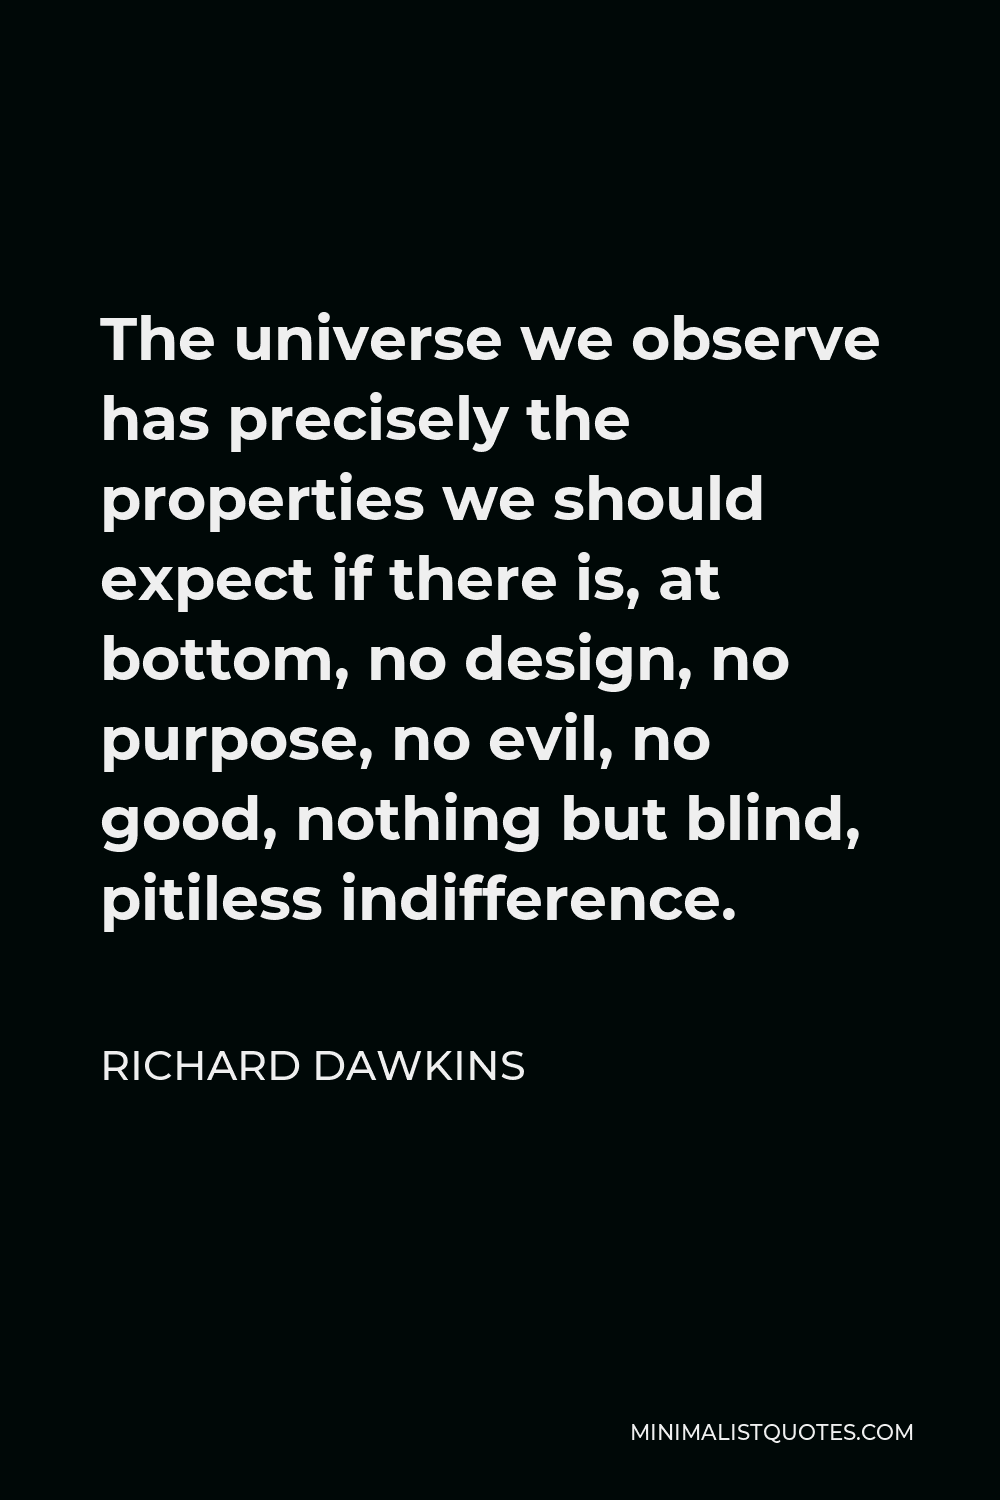 Richard Dawkins Quote - The universe we observe has precisely the properties we should expect if there is, at bottom, no design, no purpose, no evil, no good, nothing but blind, pitiless indifference.